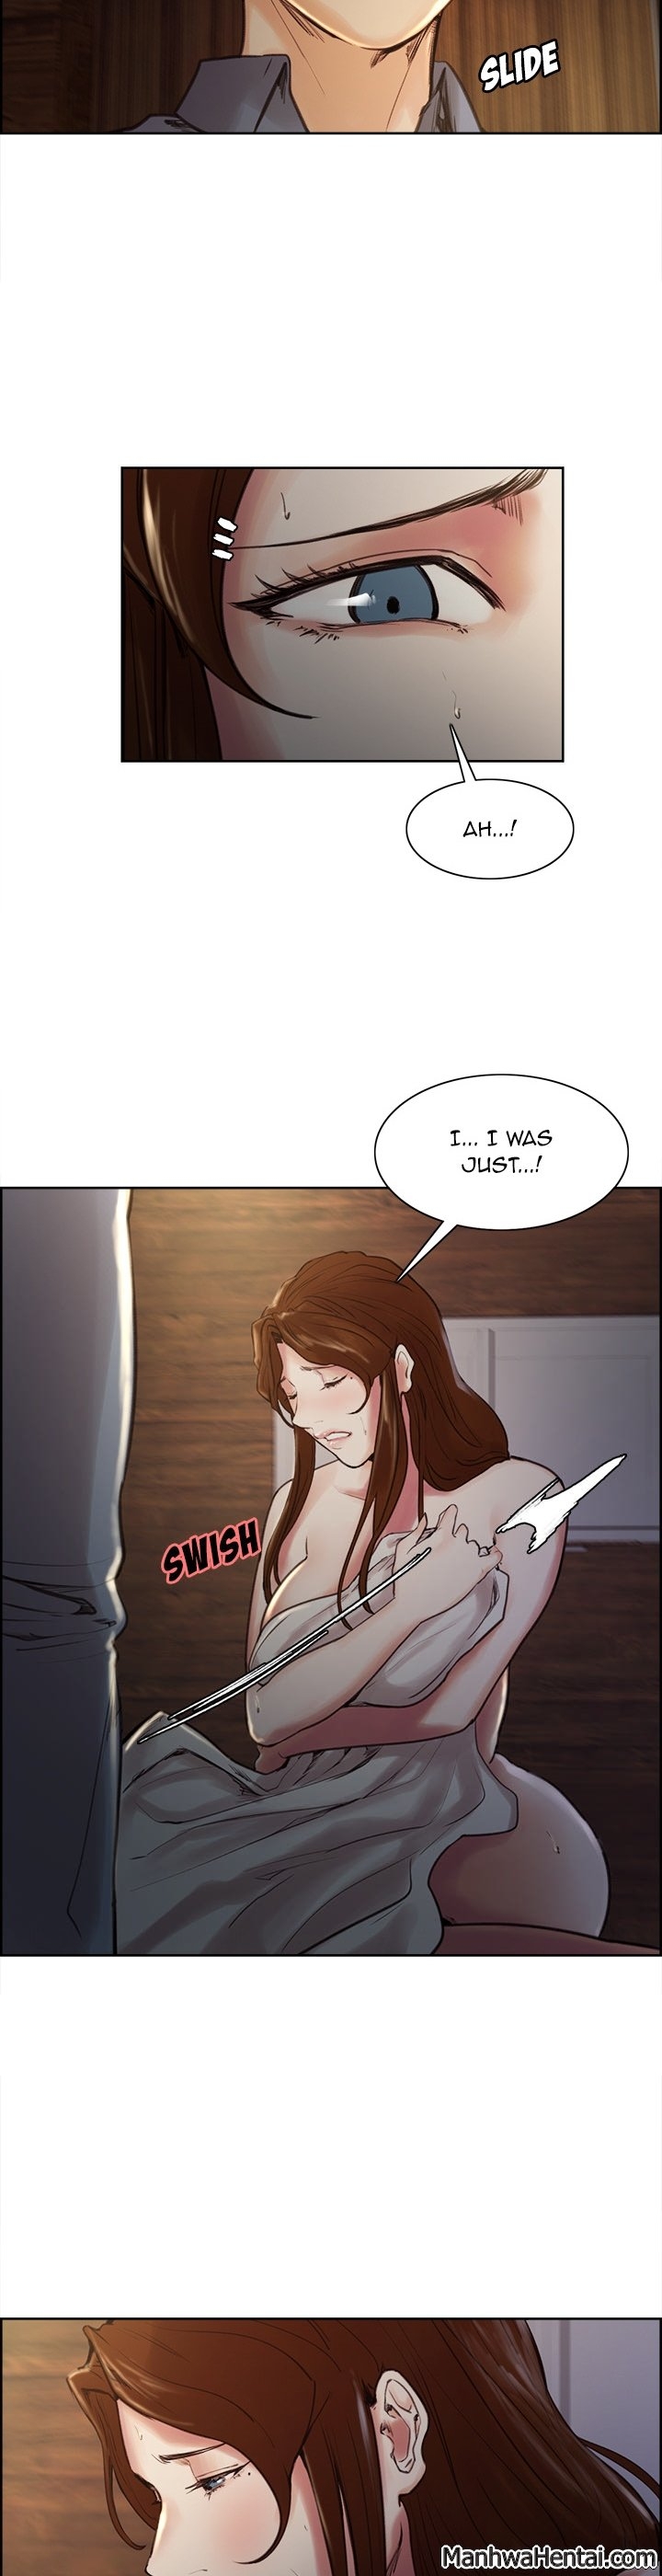 [Serious] The Sharehouse Ch. 1-11 [English] 179